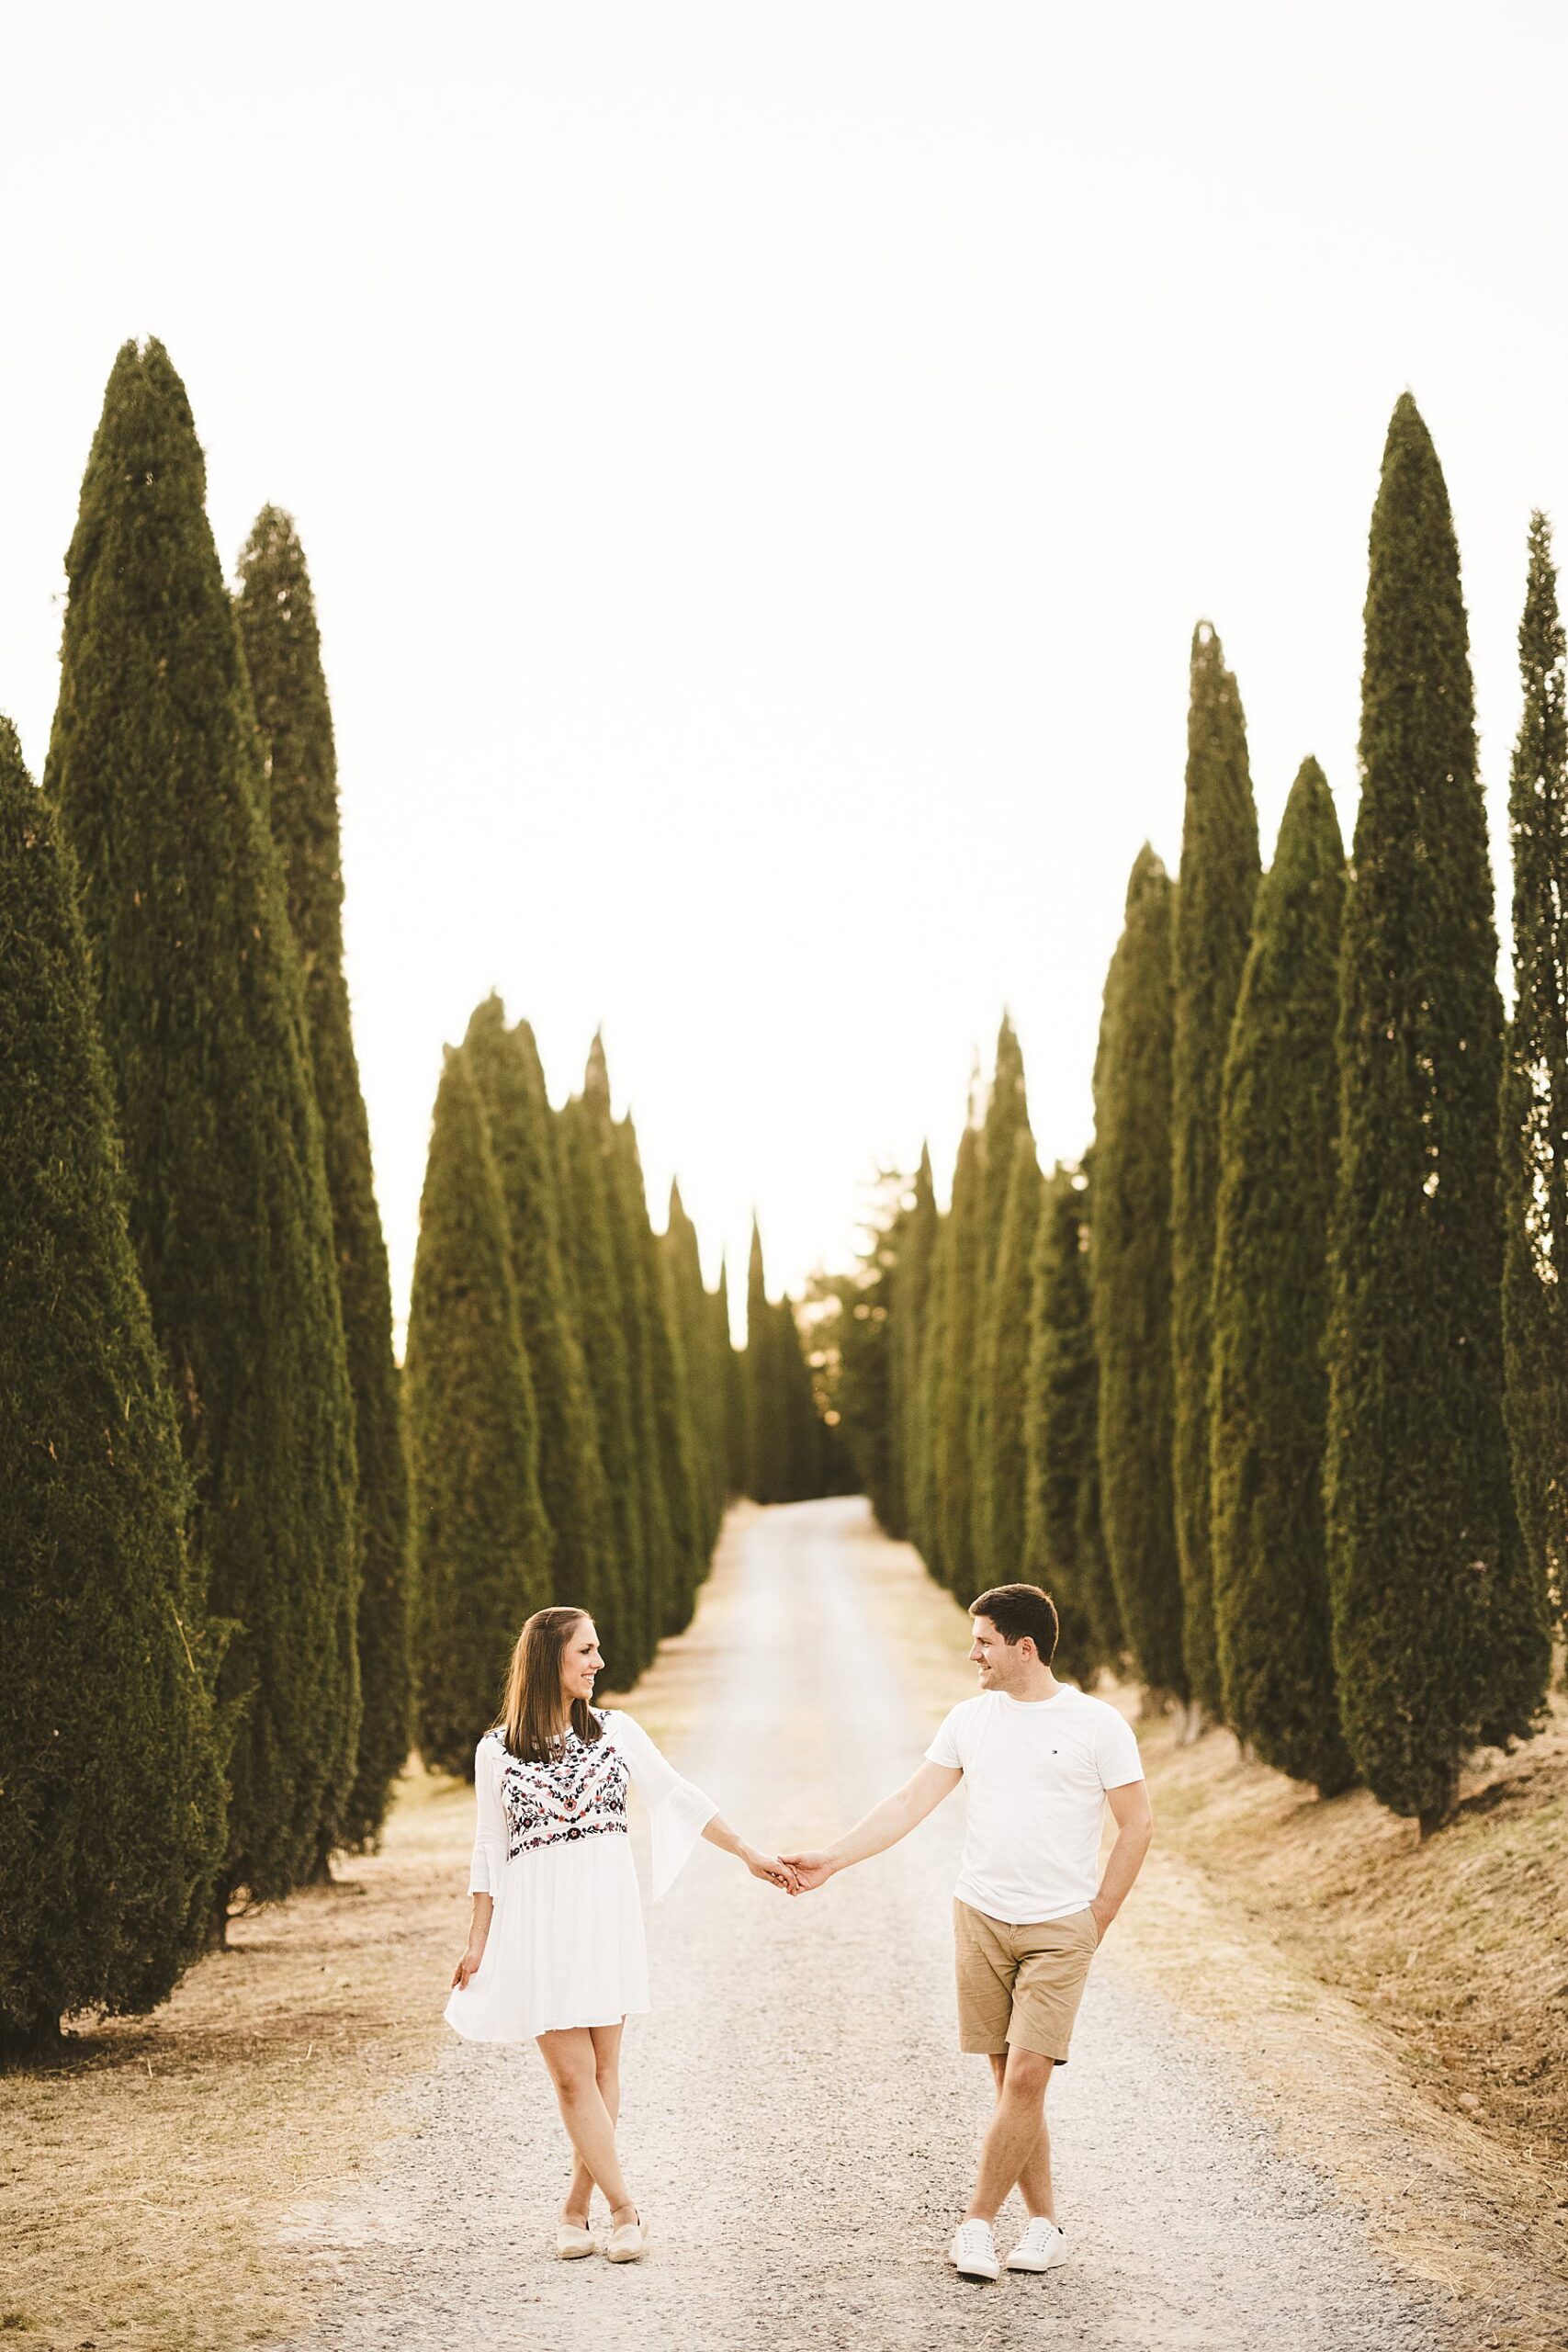 Anke and Marco’s romantic couple photoshoot in the evocative and typical avenues of cypresses near Pienza in the Val D’Orcia countryside of Tuscany